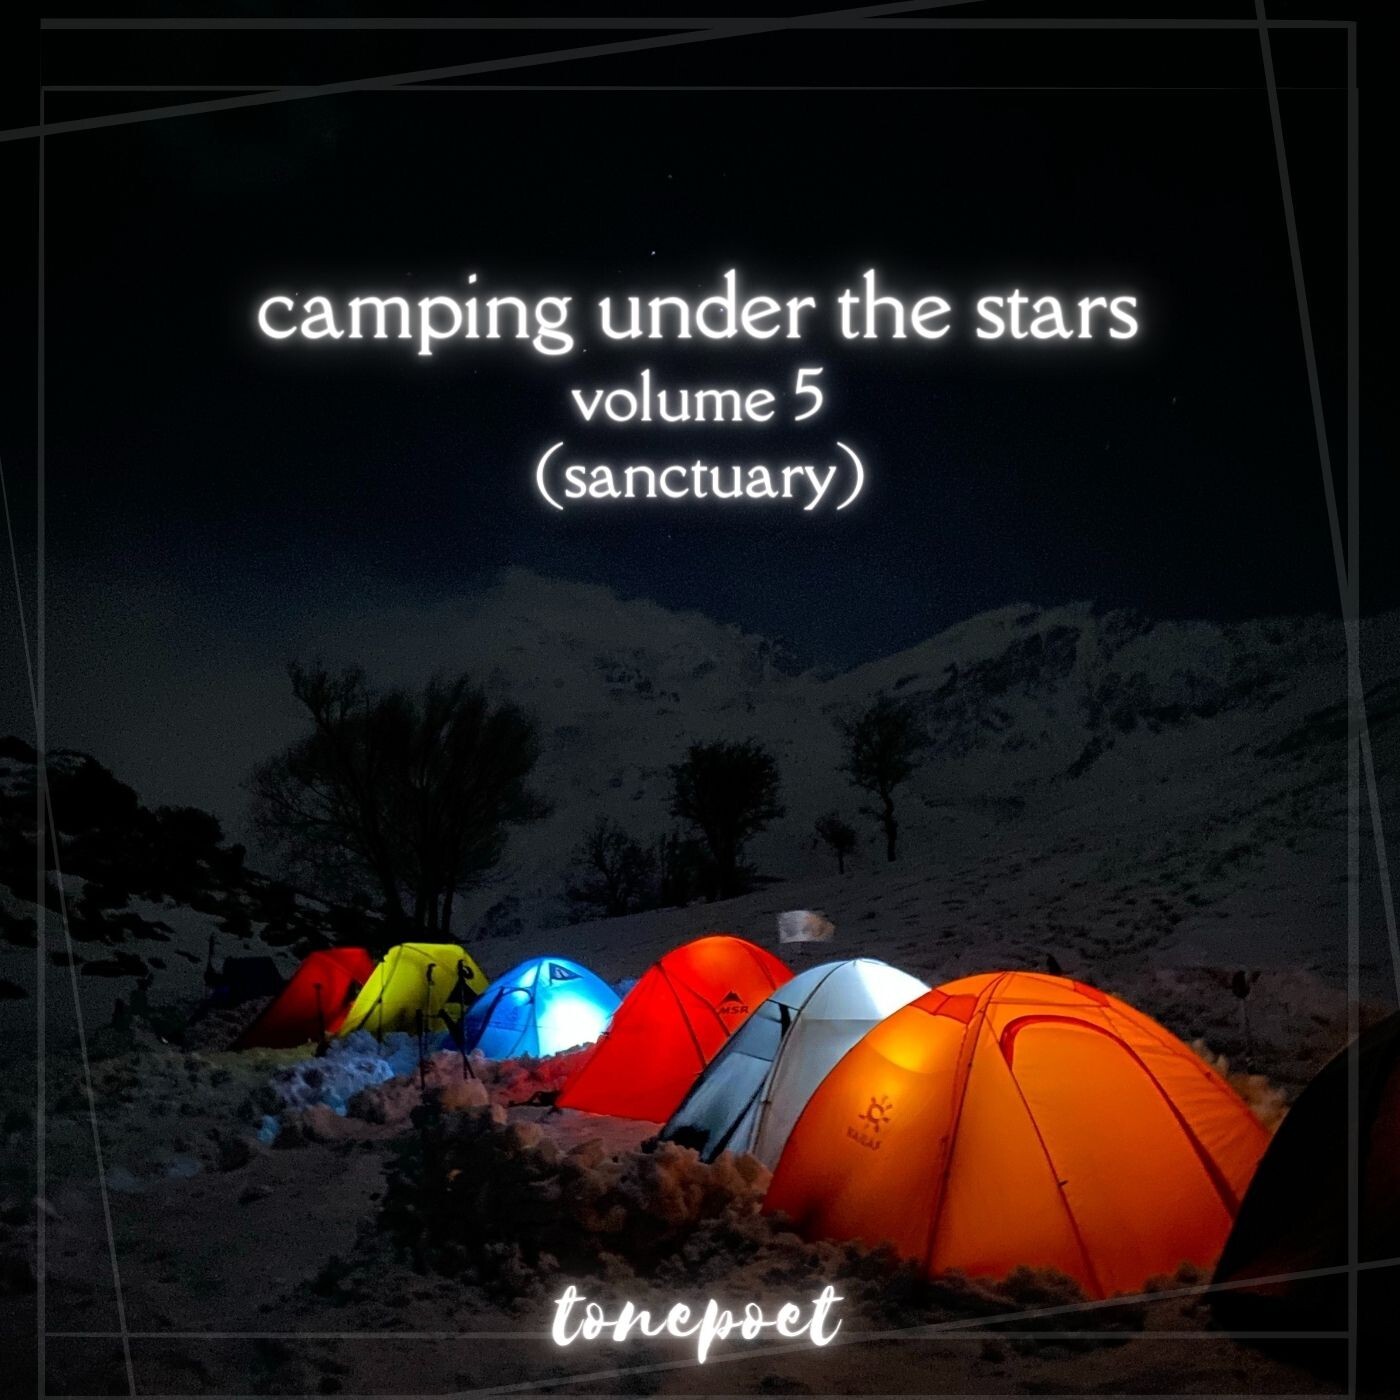 camping under the stars, vol. 5 (sanctuary)